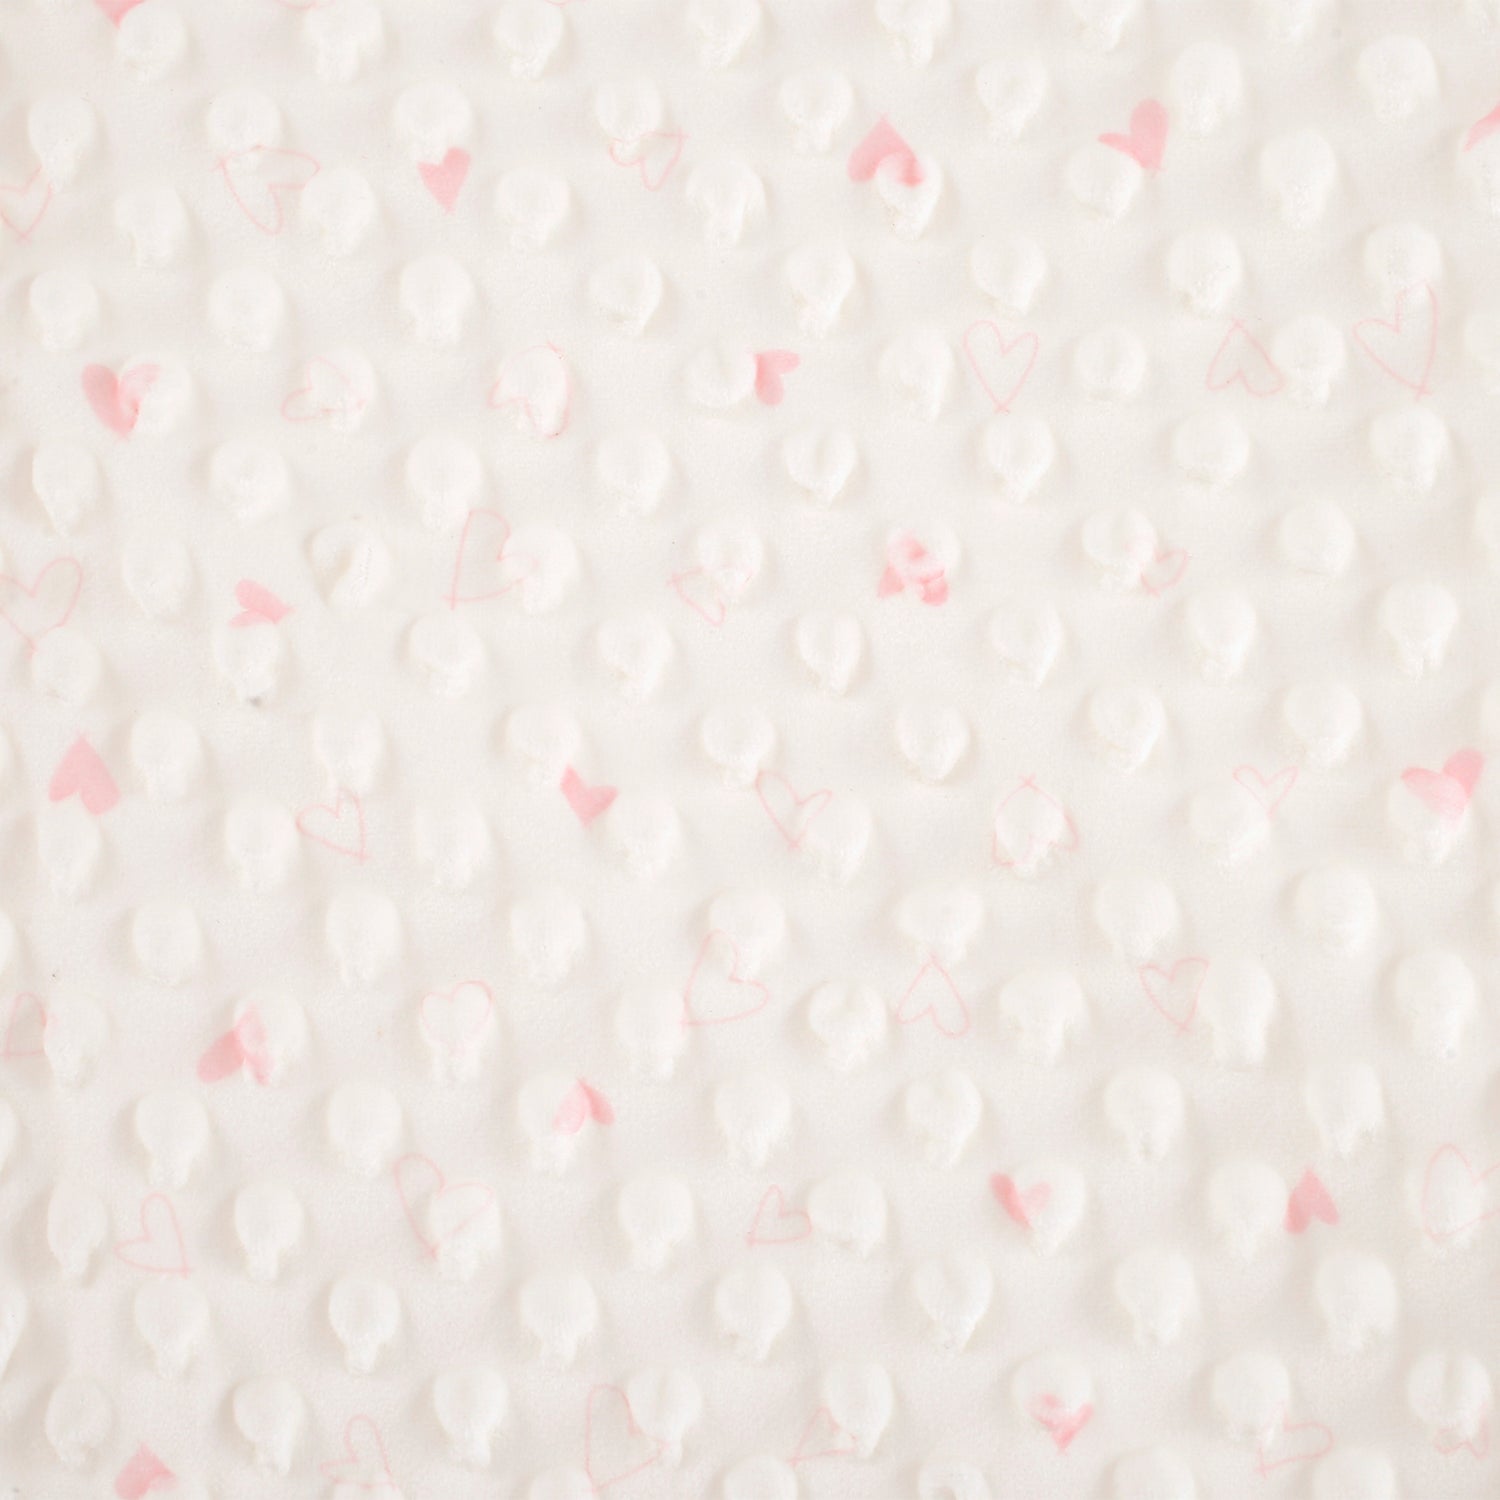 Star Off White And Pink Bubble Blanket - Baby Moo